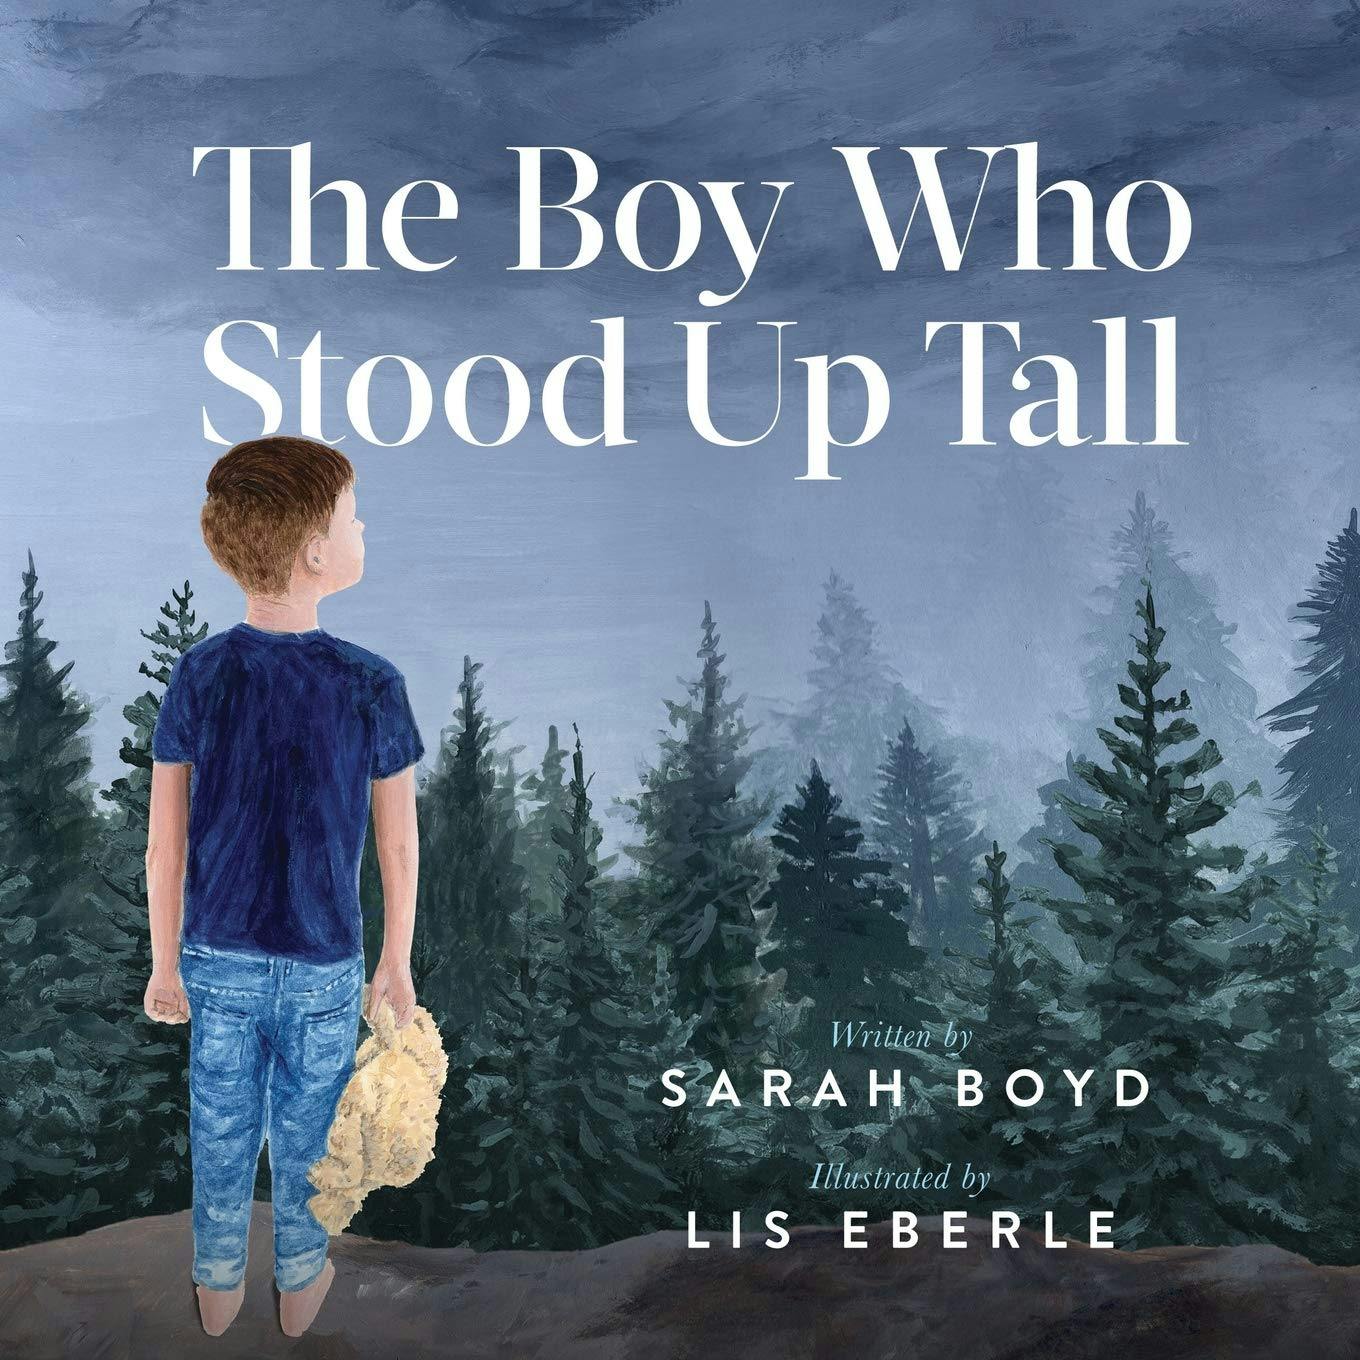 The boy who stood up tall